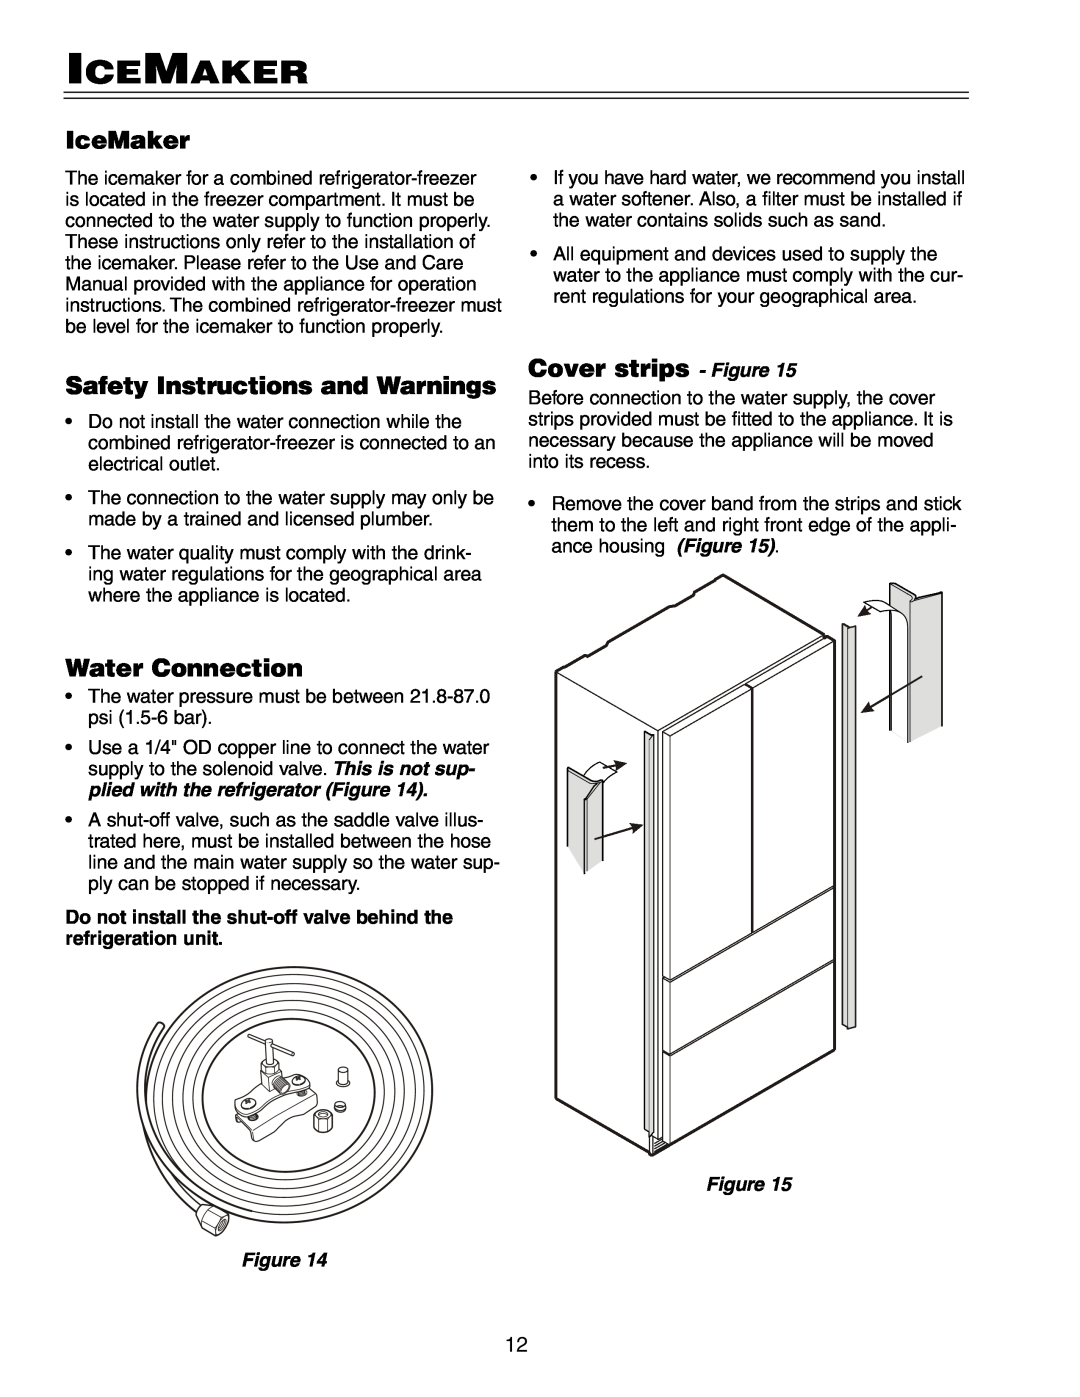 Liebherr HC 20 manual Icemaker, IceMaker, Safety Instructions and Warnings, Water Connection, Cover strips - Figure 